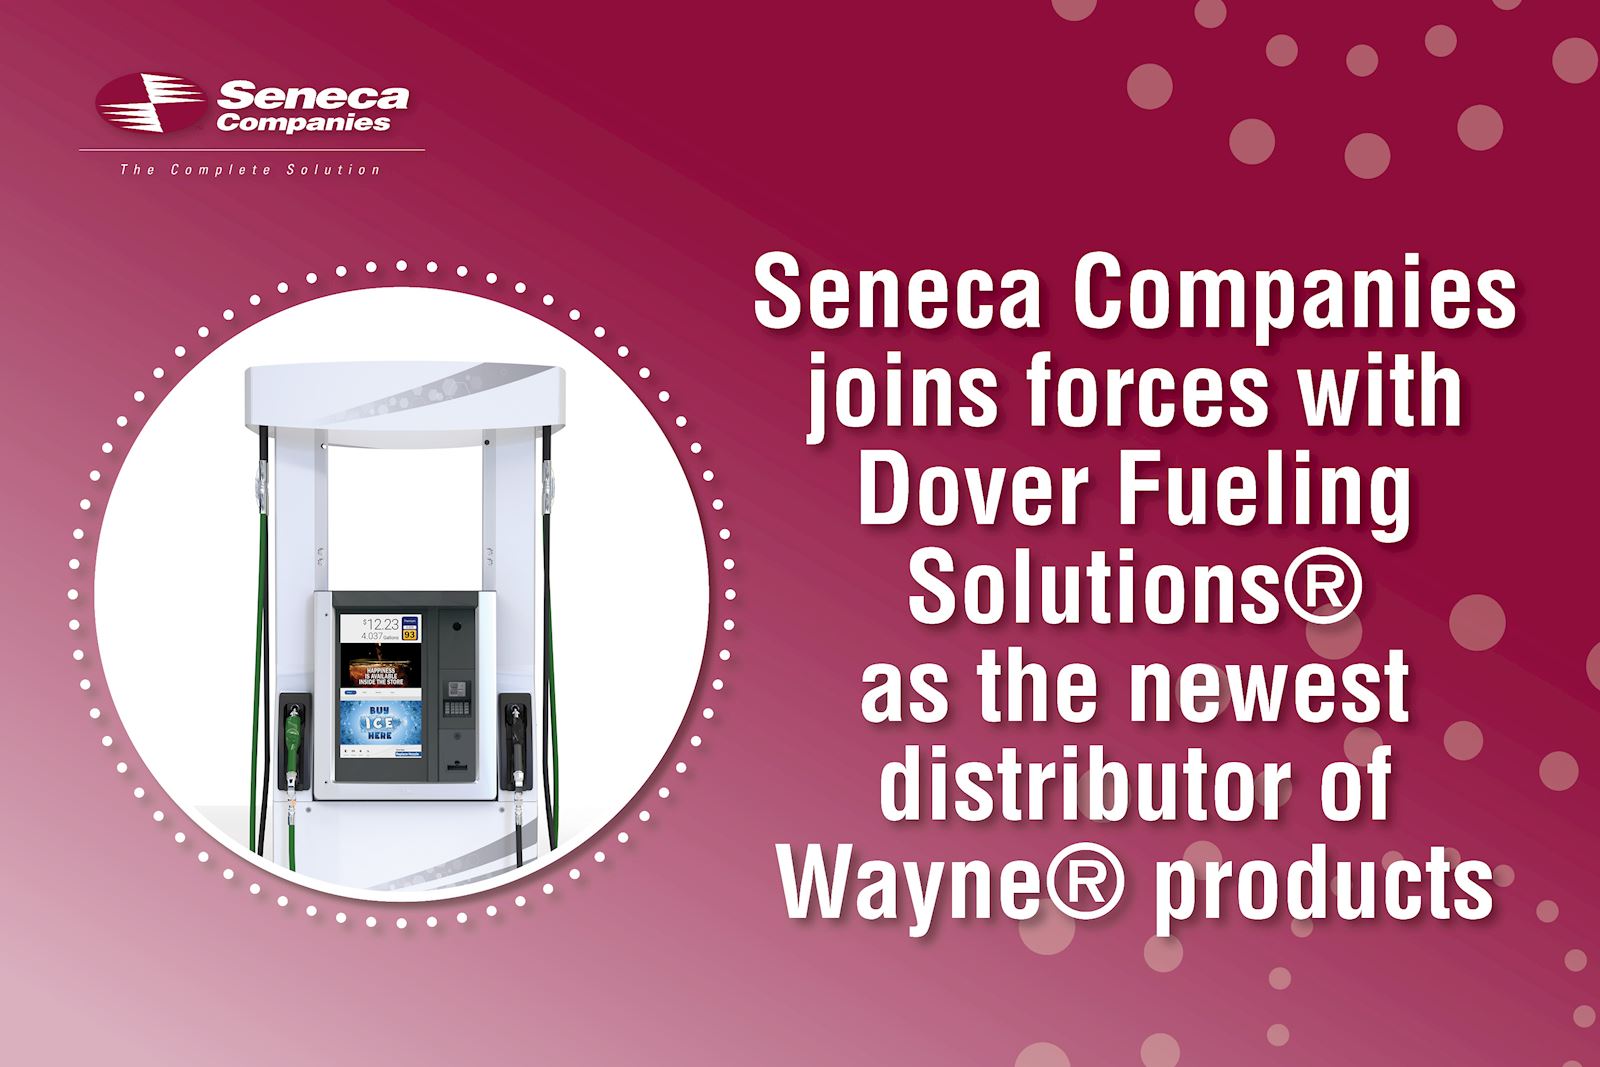 Seneca Companies joins forces with Dover Fueling Solutions® as the newest distributor of Wayne® products